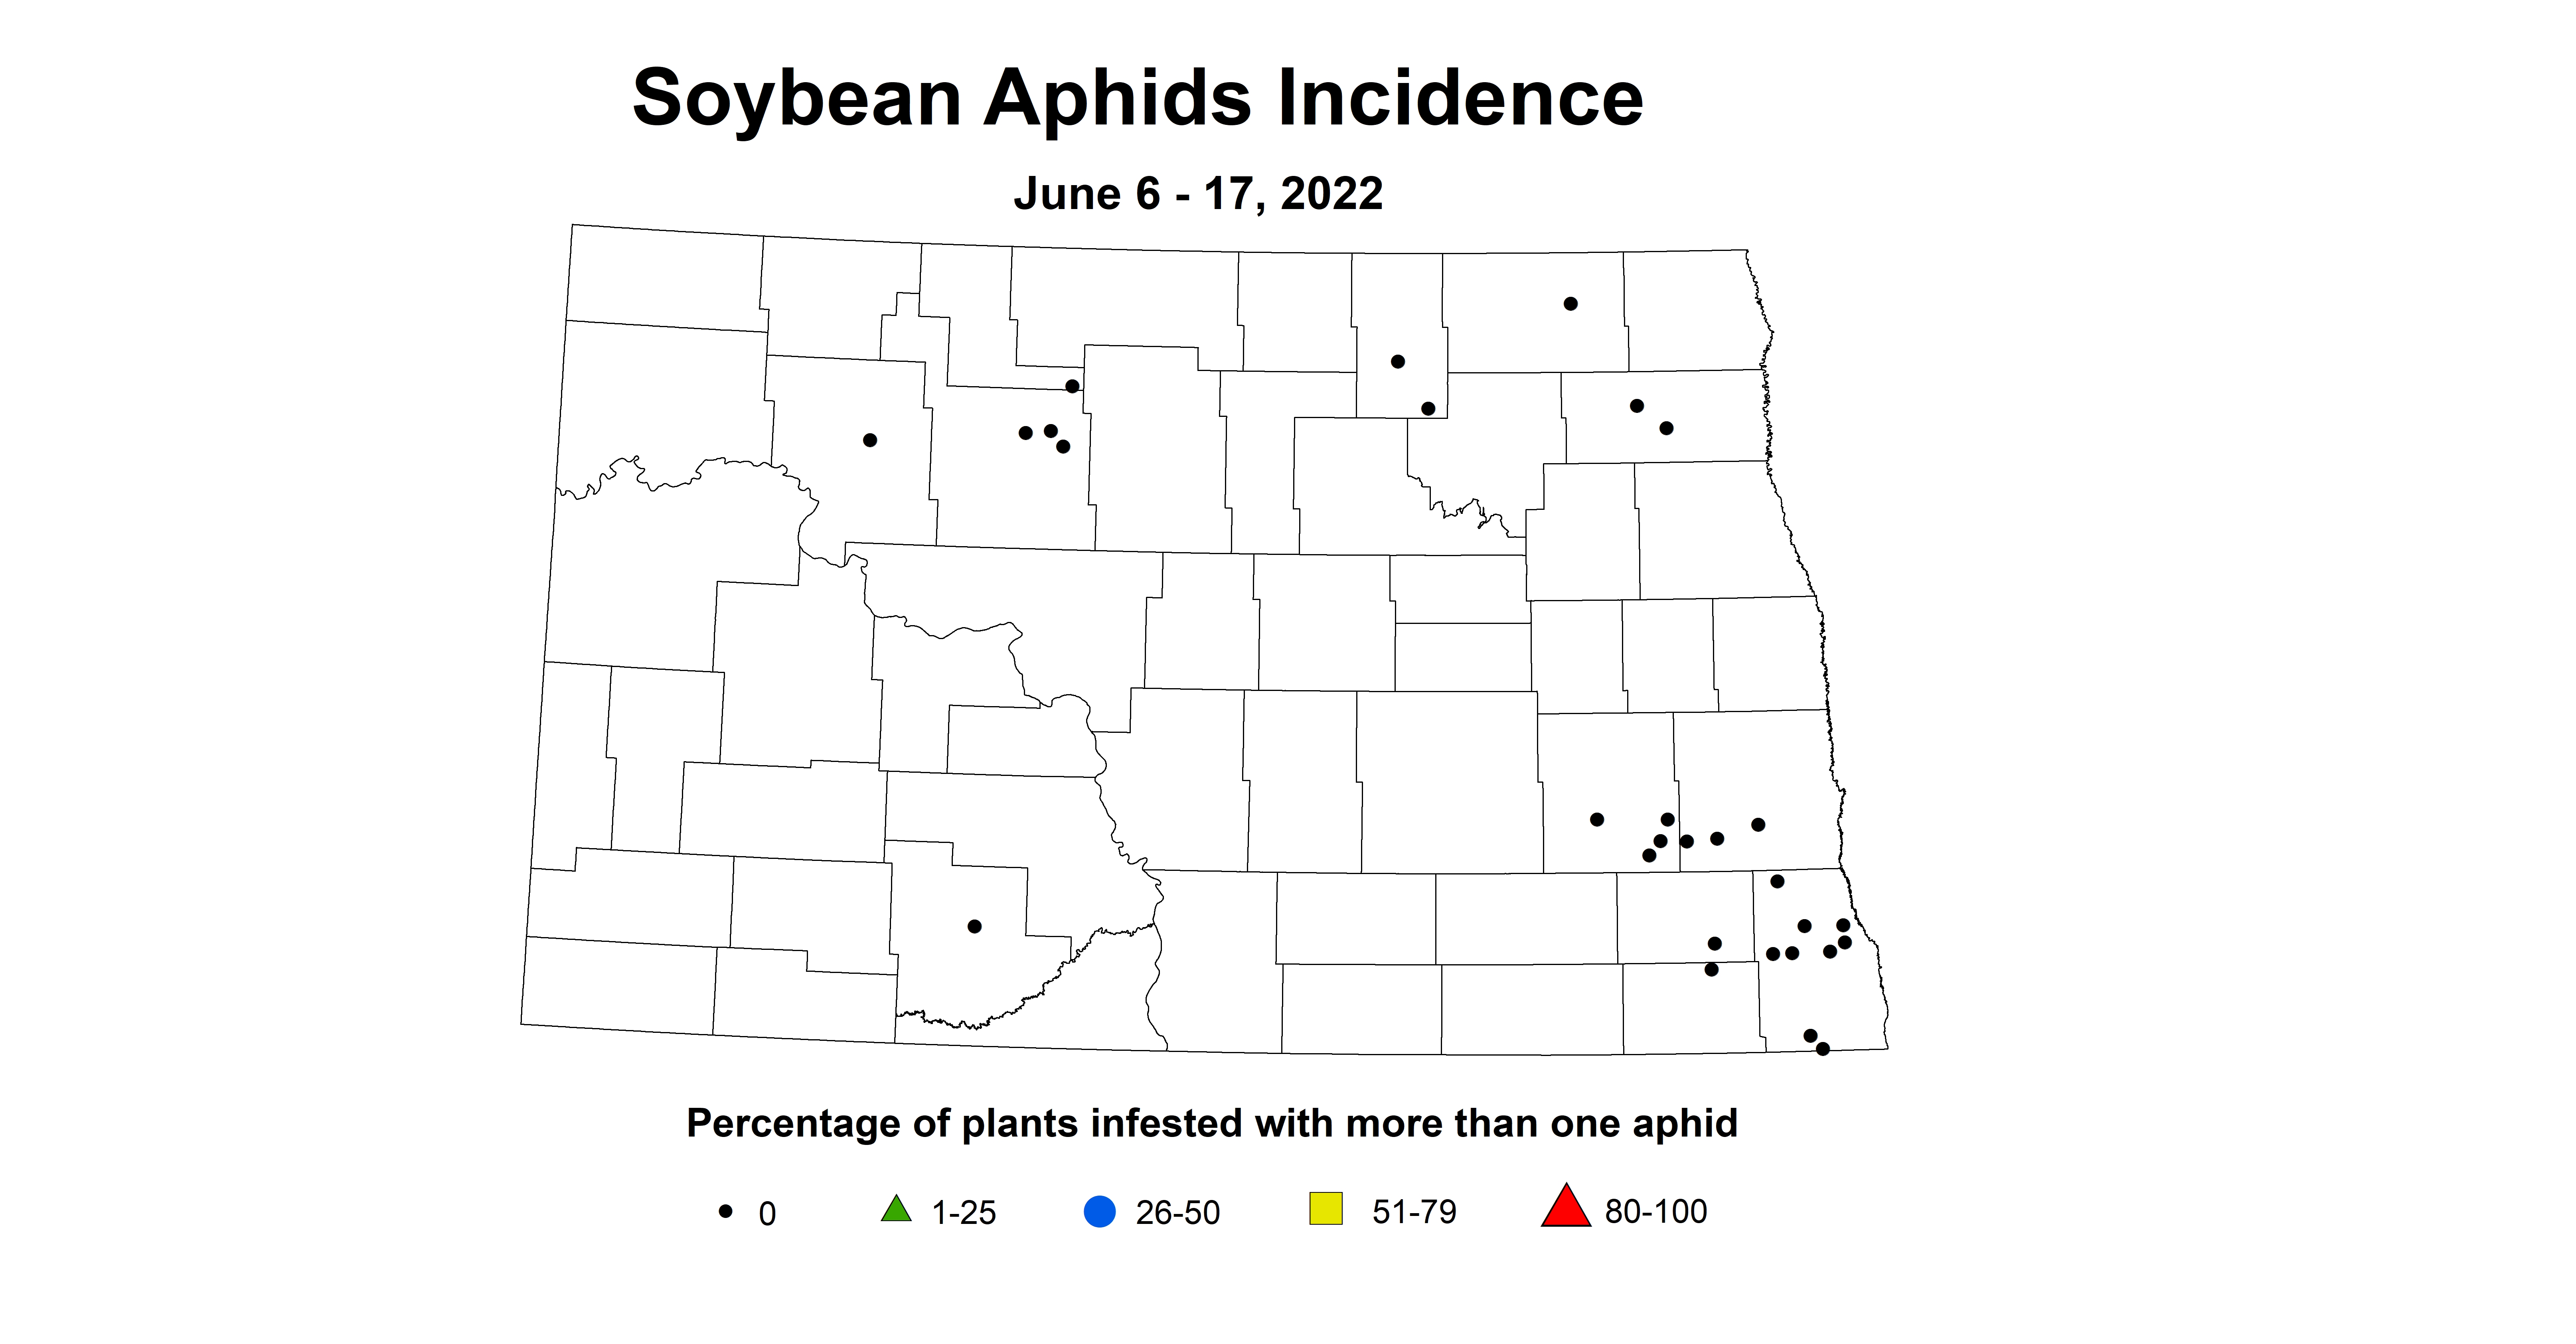 ND IPM soybeans aphid incidence June 6 - 17 2022